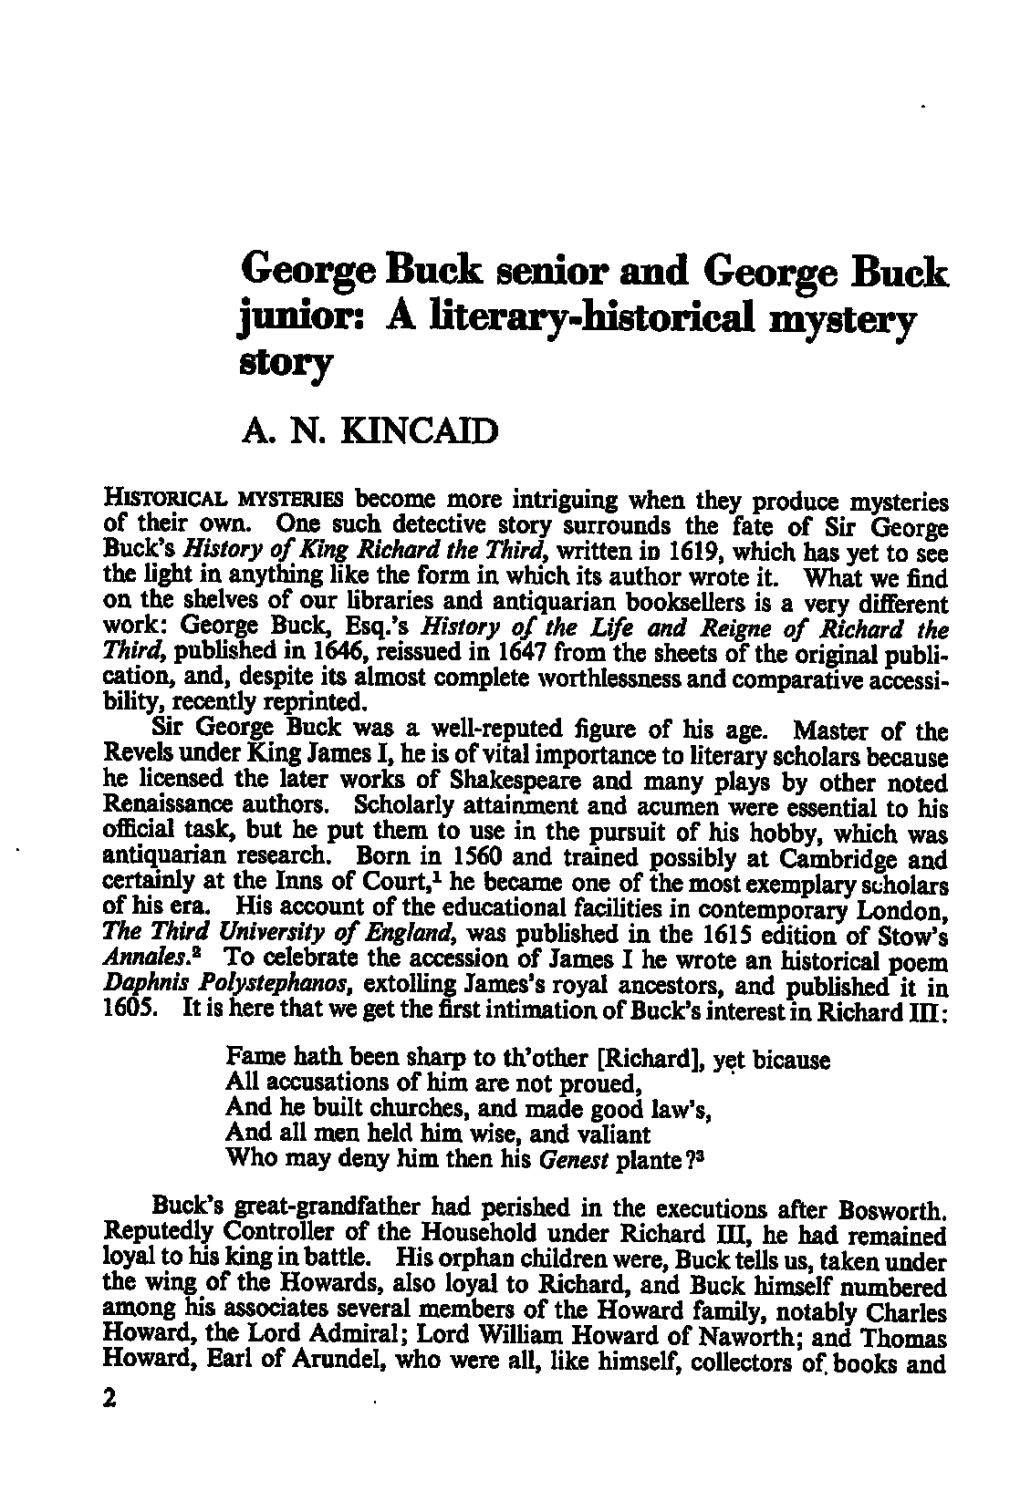 George Buck Senior and George Buck Junior: a Literary-Historical Mystery Story